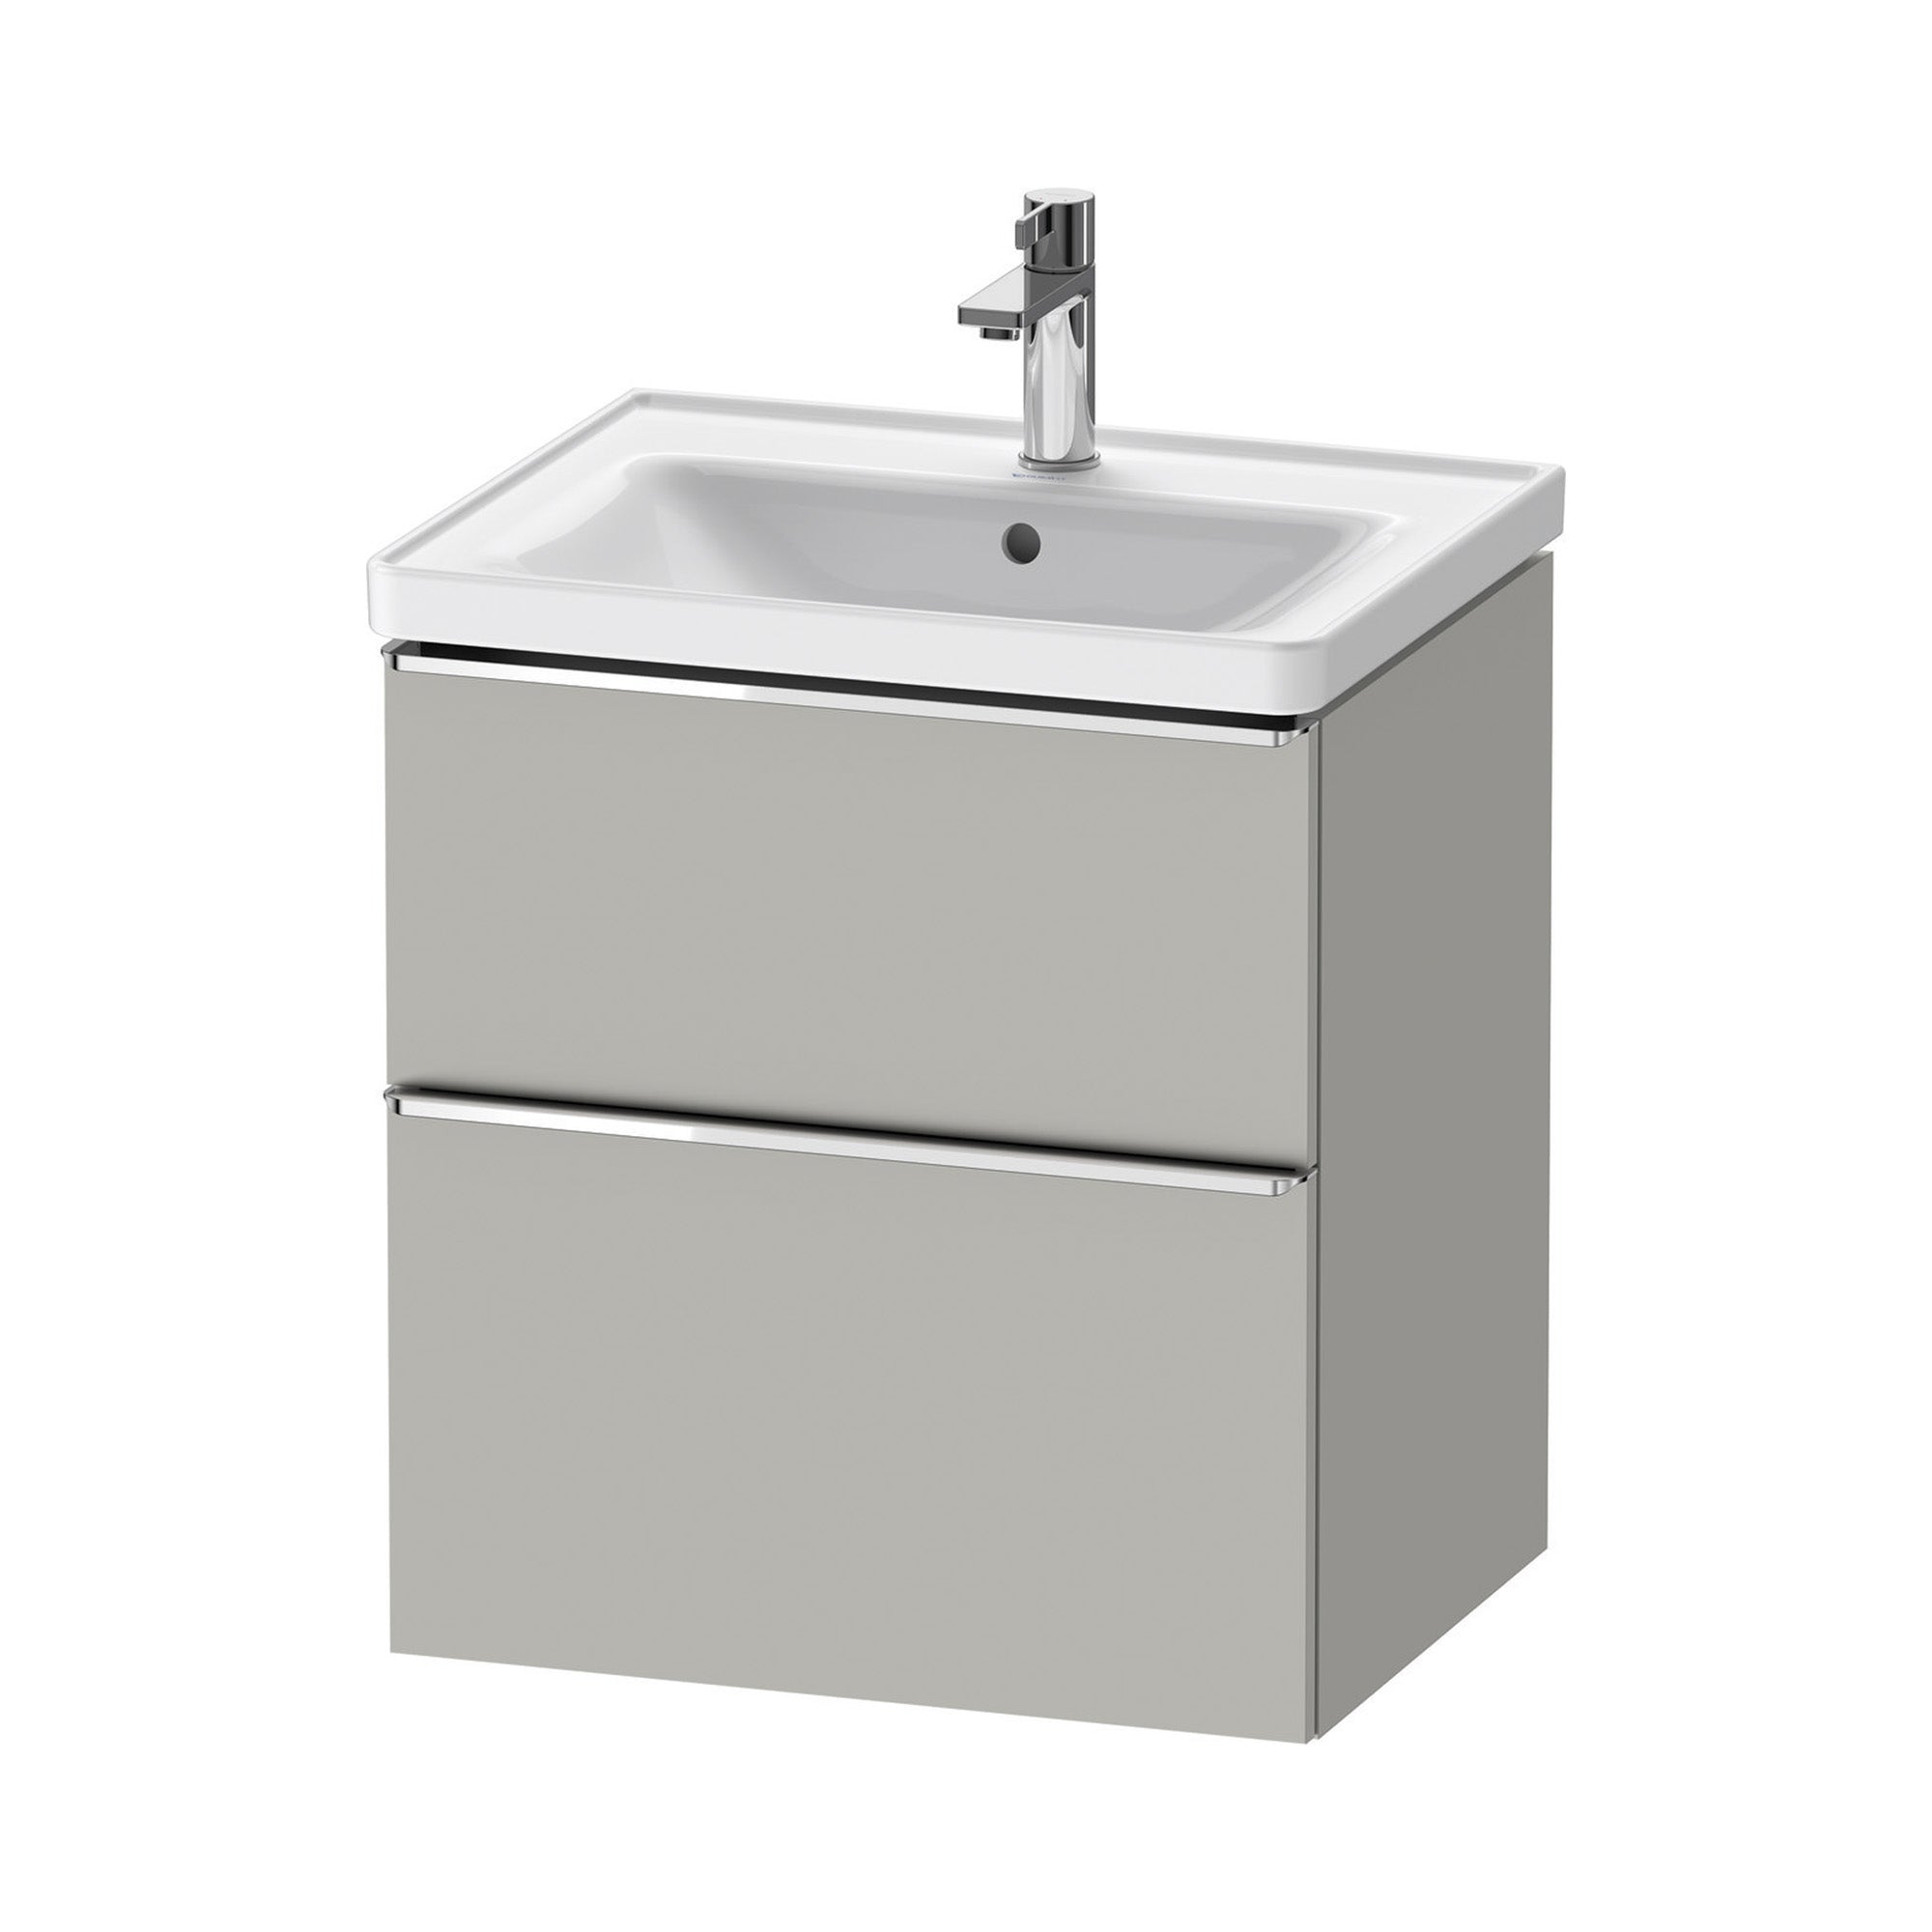 duravit d-neo 600 wall mounted vanity unit with d-neo basin concrete grey chrome handles